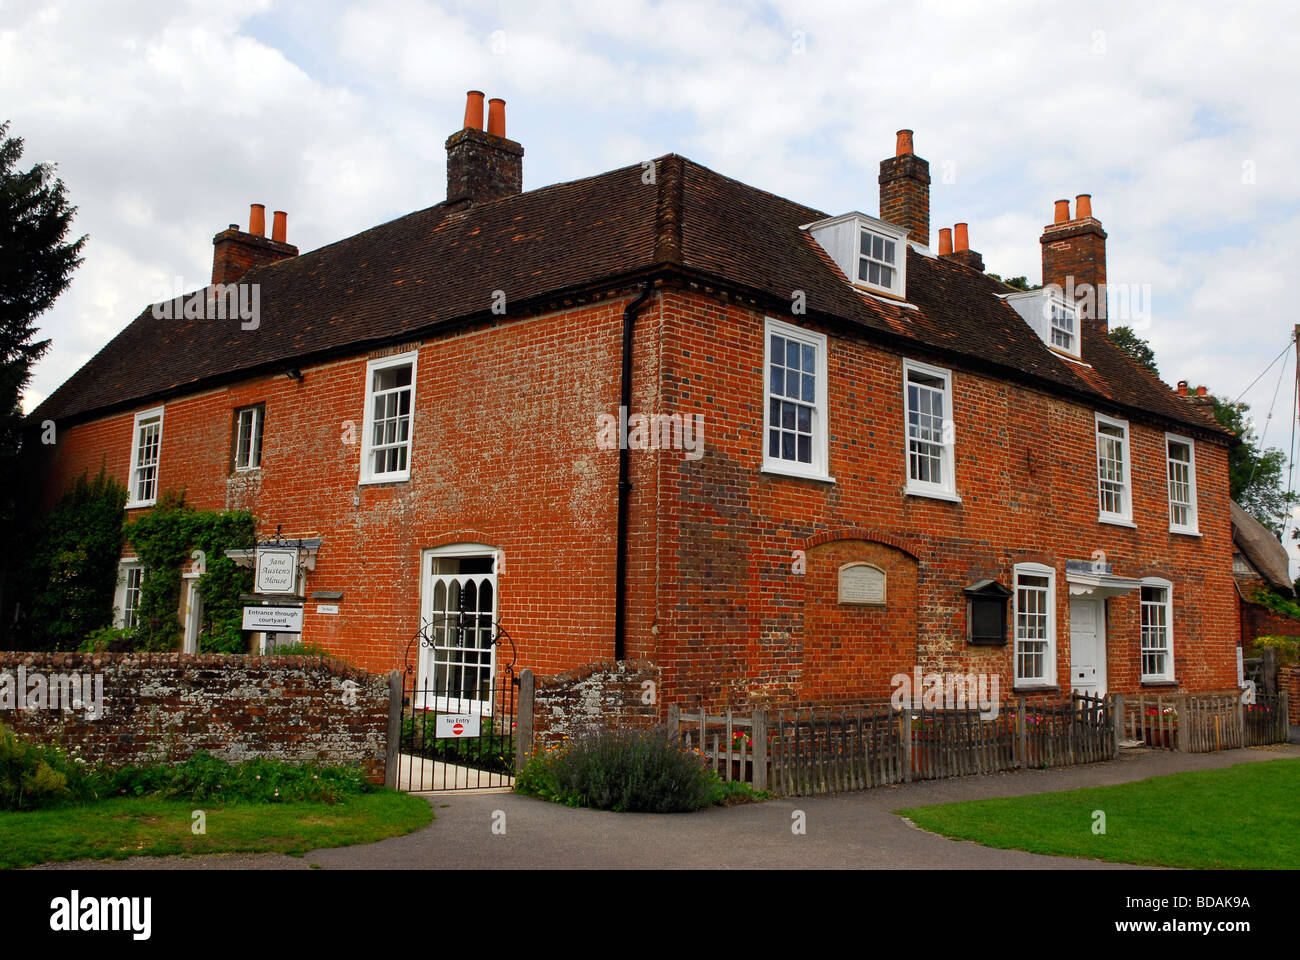 19th century novelist Jane Austen's home from 1809 until 1817 where she lived with her mother & sister Cassandra, Chawton, near Alton, Hampshire, UK. Stock Photo